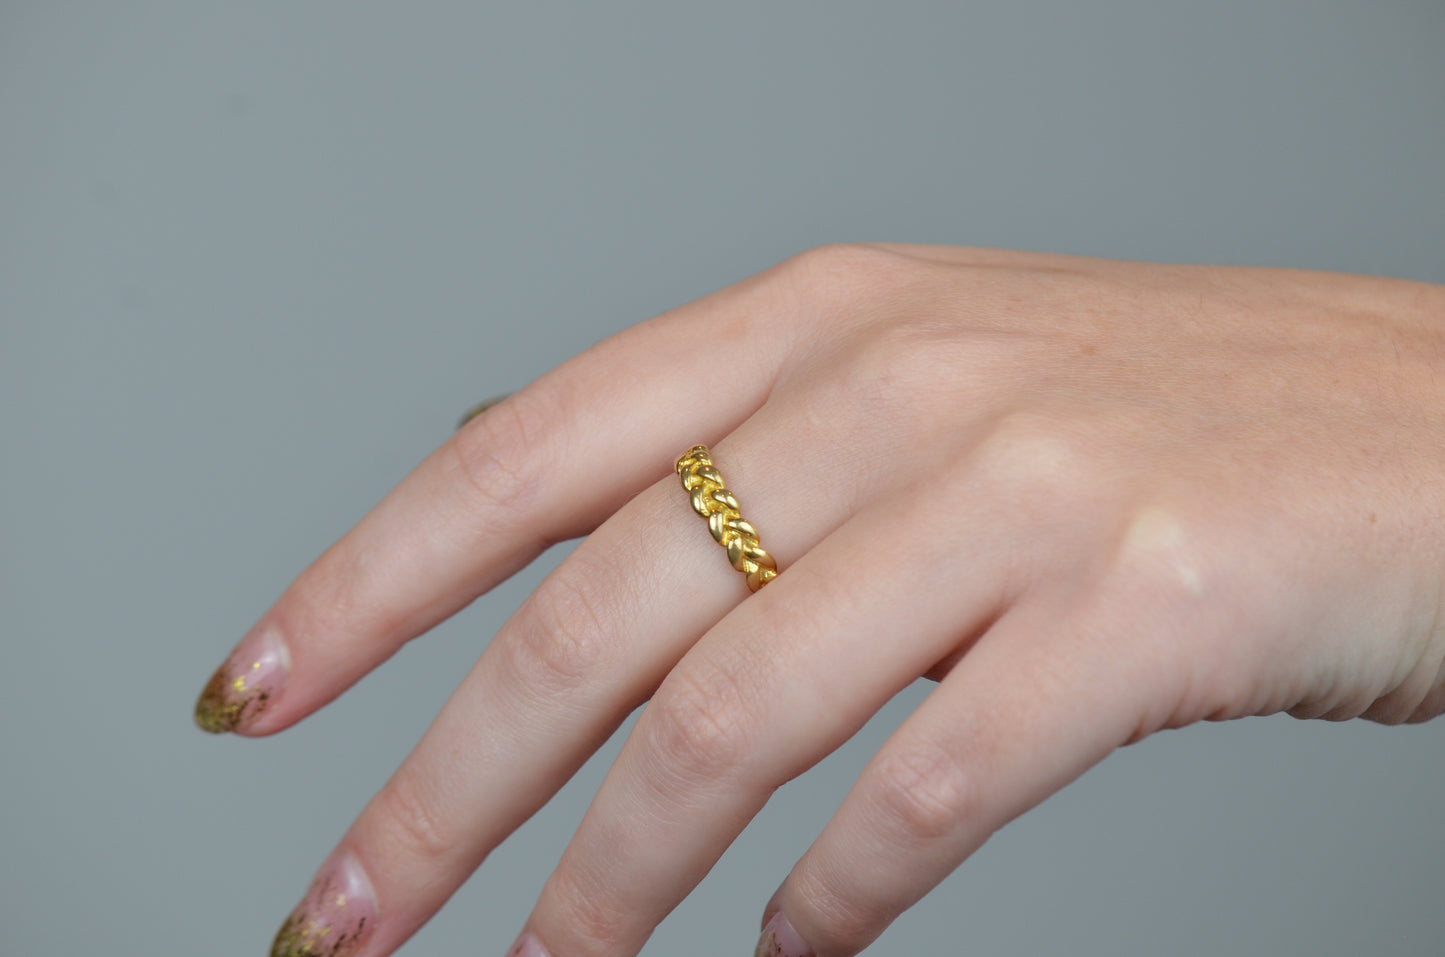 Buttery Vintage Braid Ring